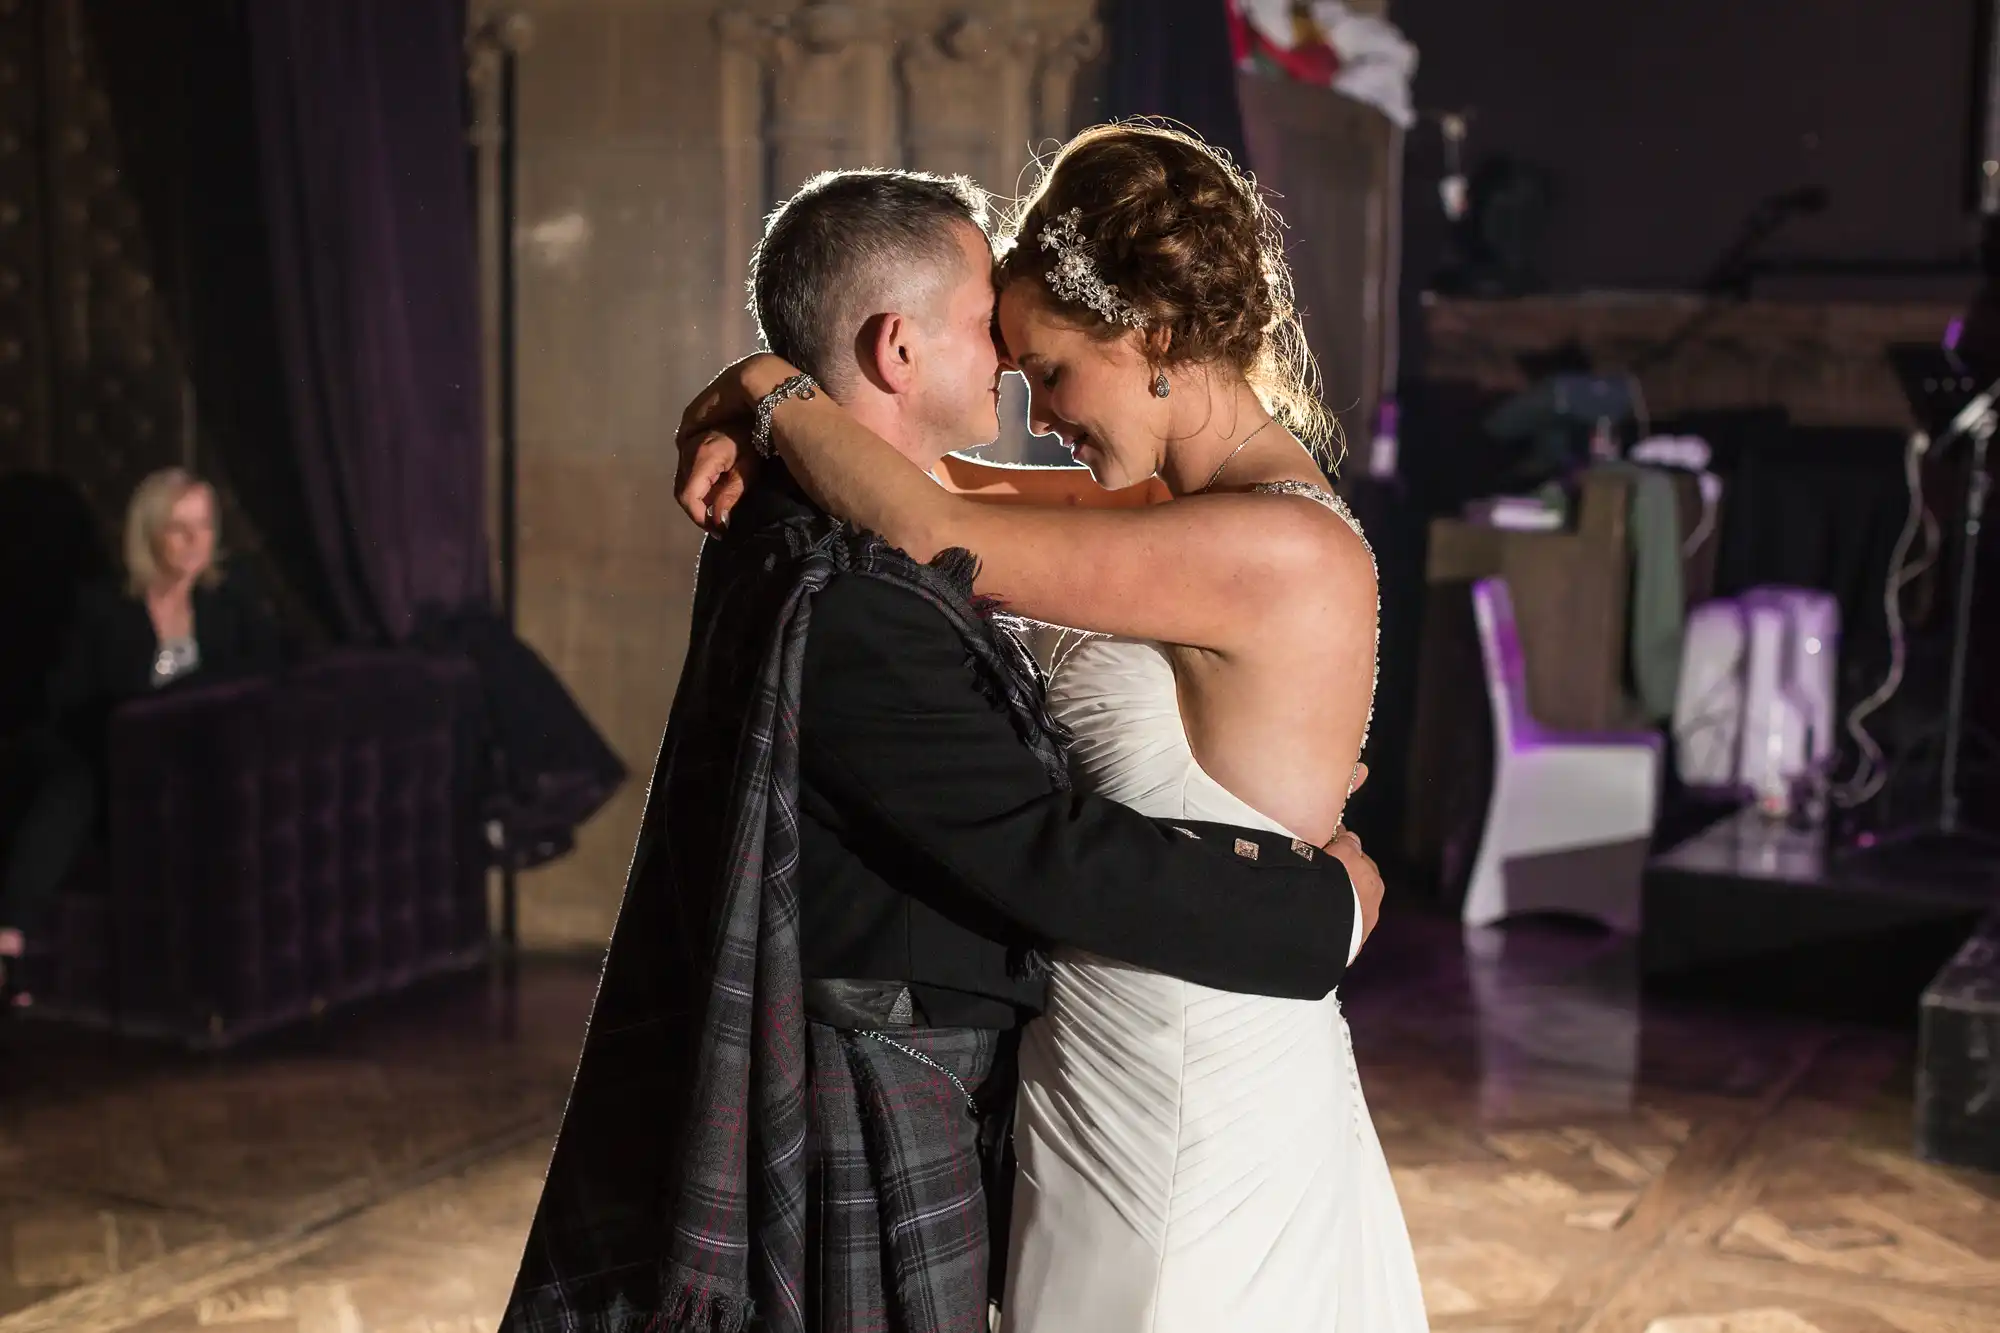 A newlywed couple shares a slow dance, the bride and groom embracing on a dance floor dimly lit with purple lights.